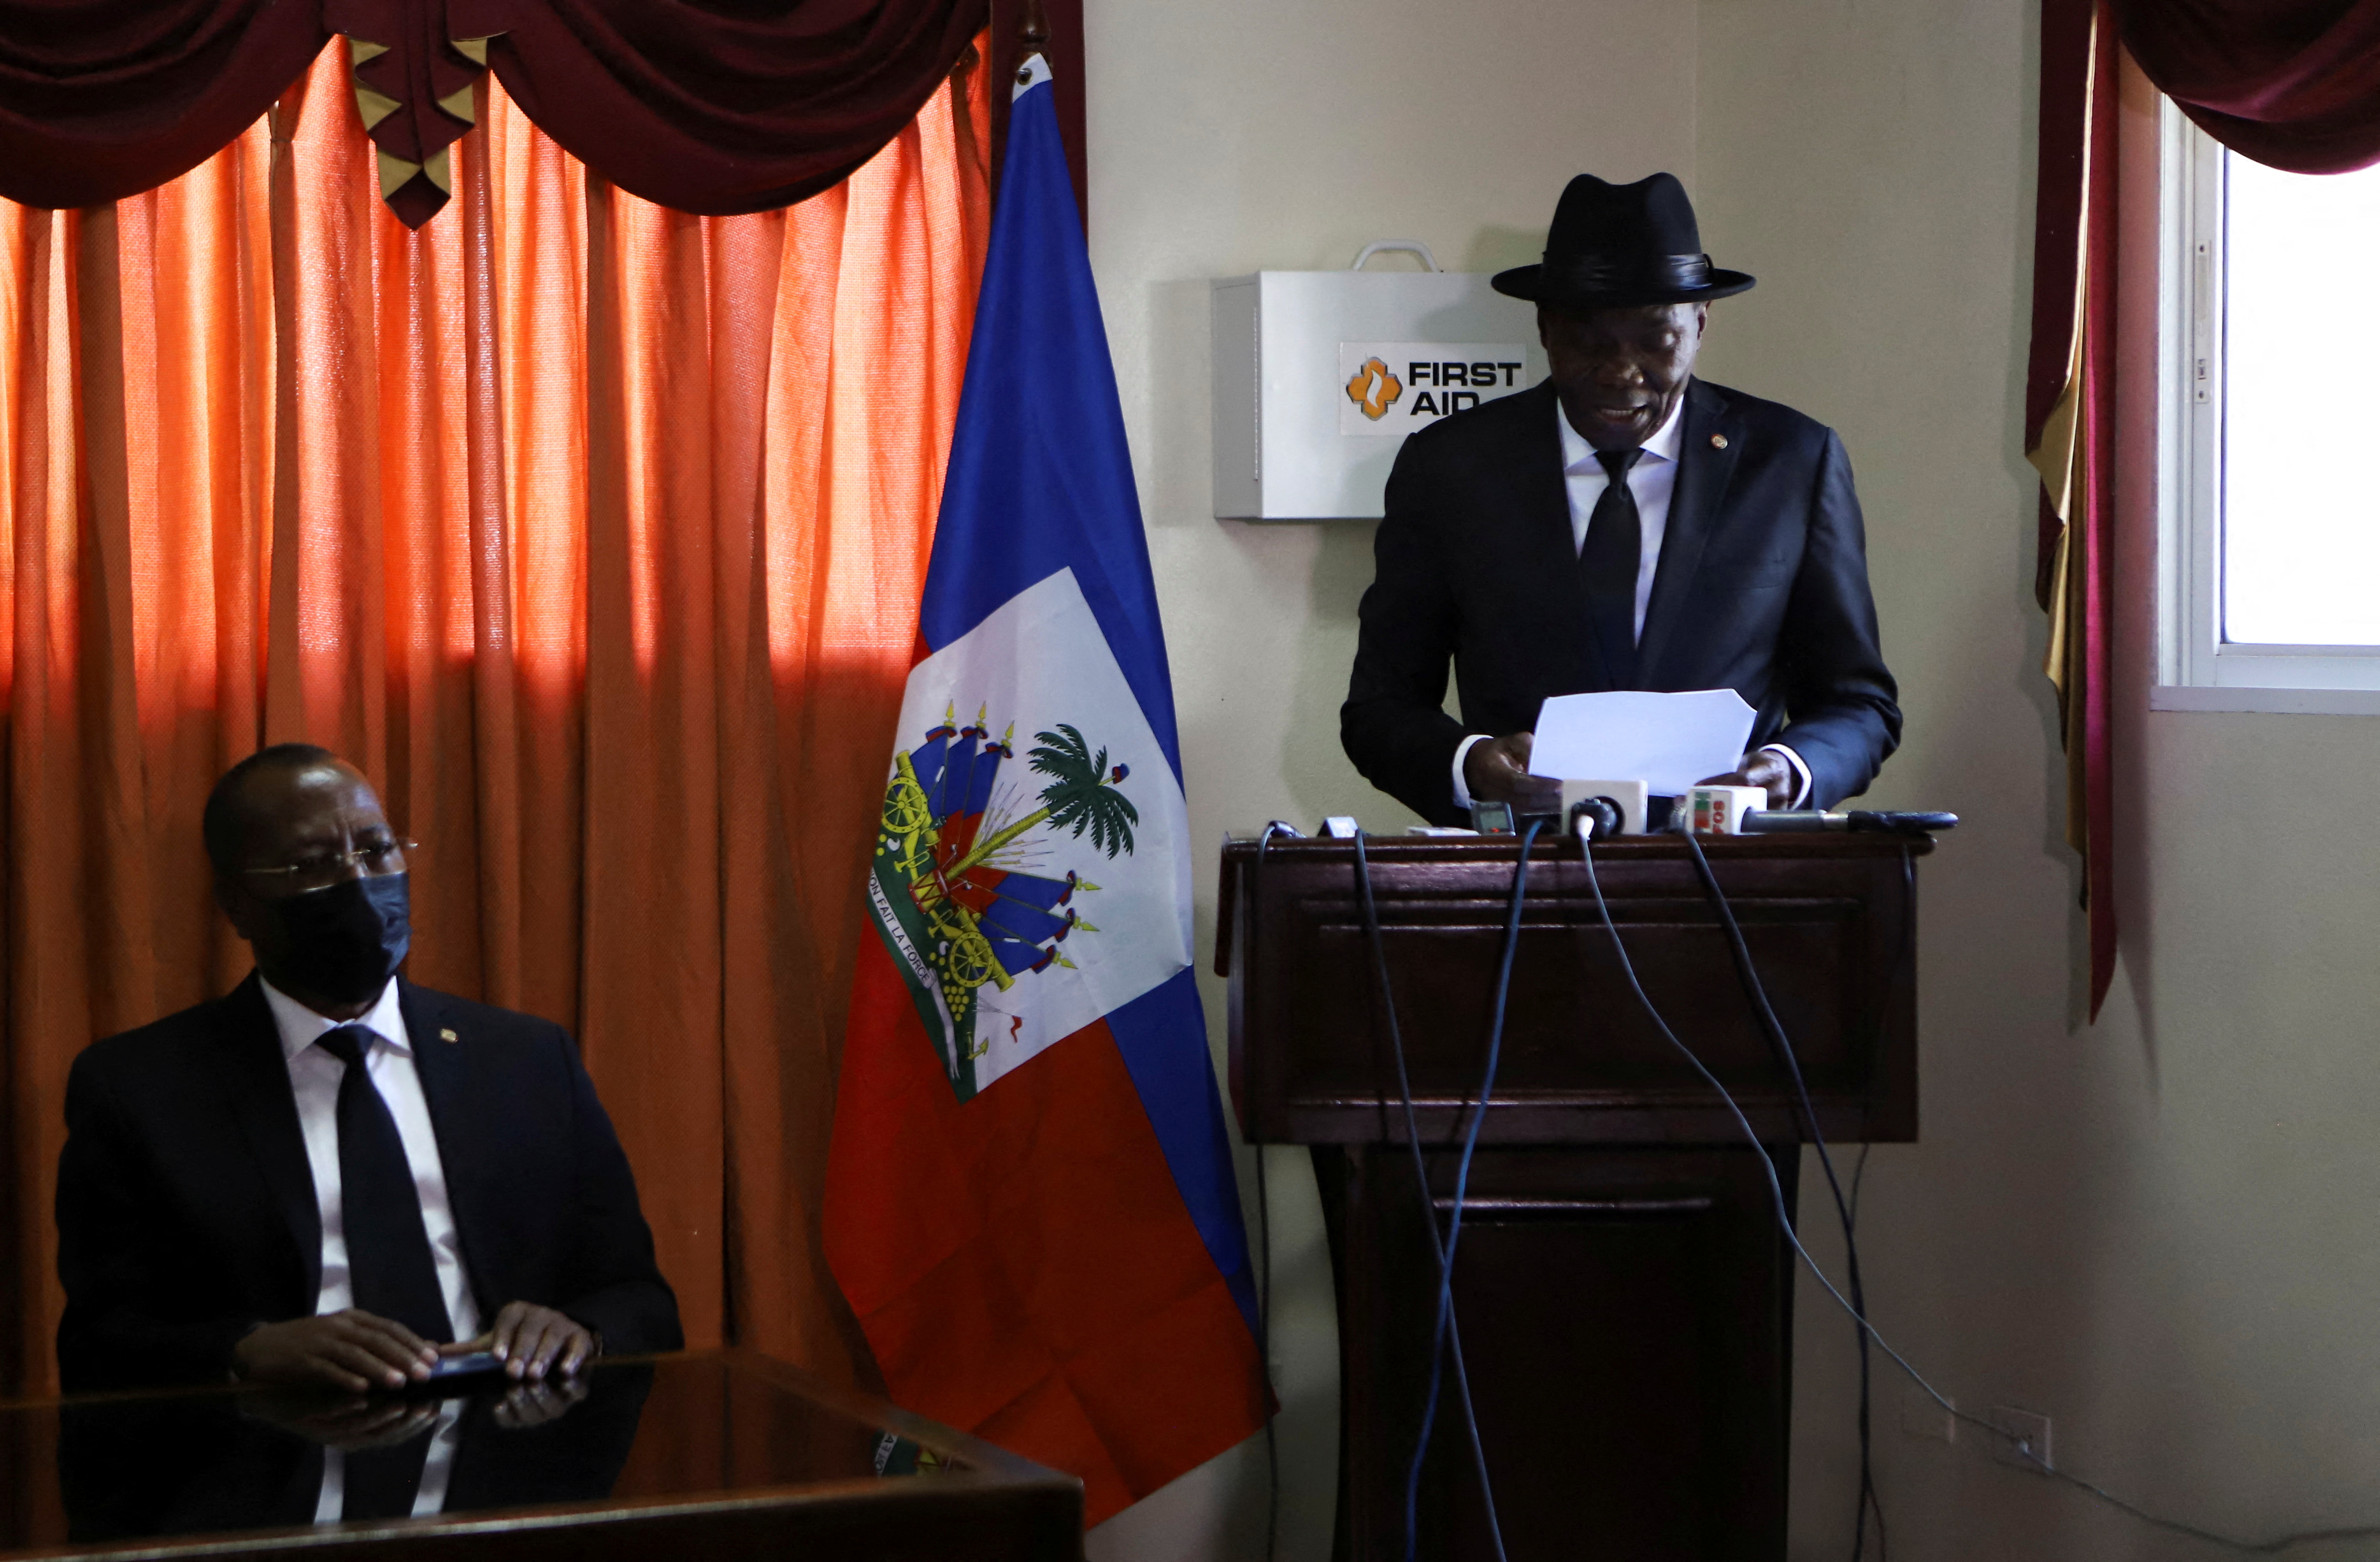 Haiti's outgoing Senate leader Joseph Lambert with Senator Pierre Francois Syldor, speaks at a news conference where he announced his intention to continue holding sessions as his term expires, in Port-au-Prince, Haiti January 10, 2022. REUTERS/Ralph Tedy Erol